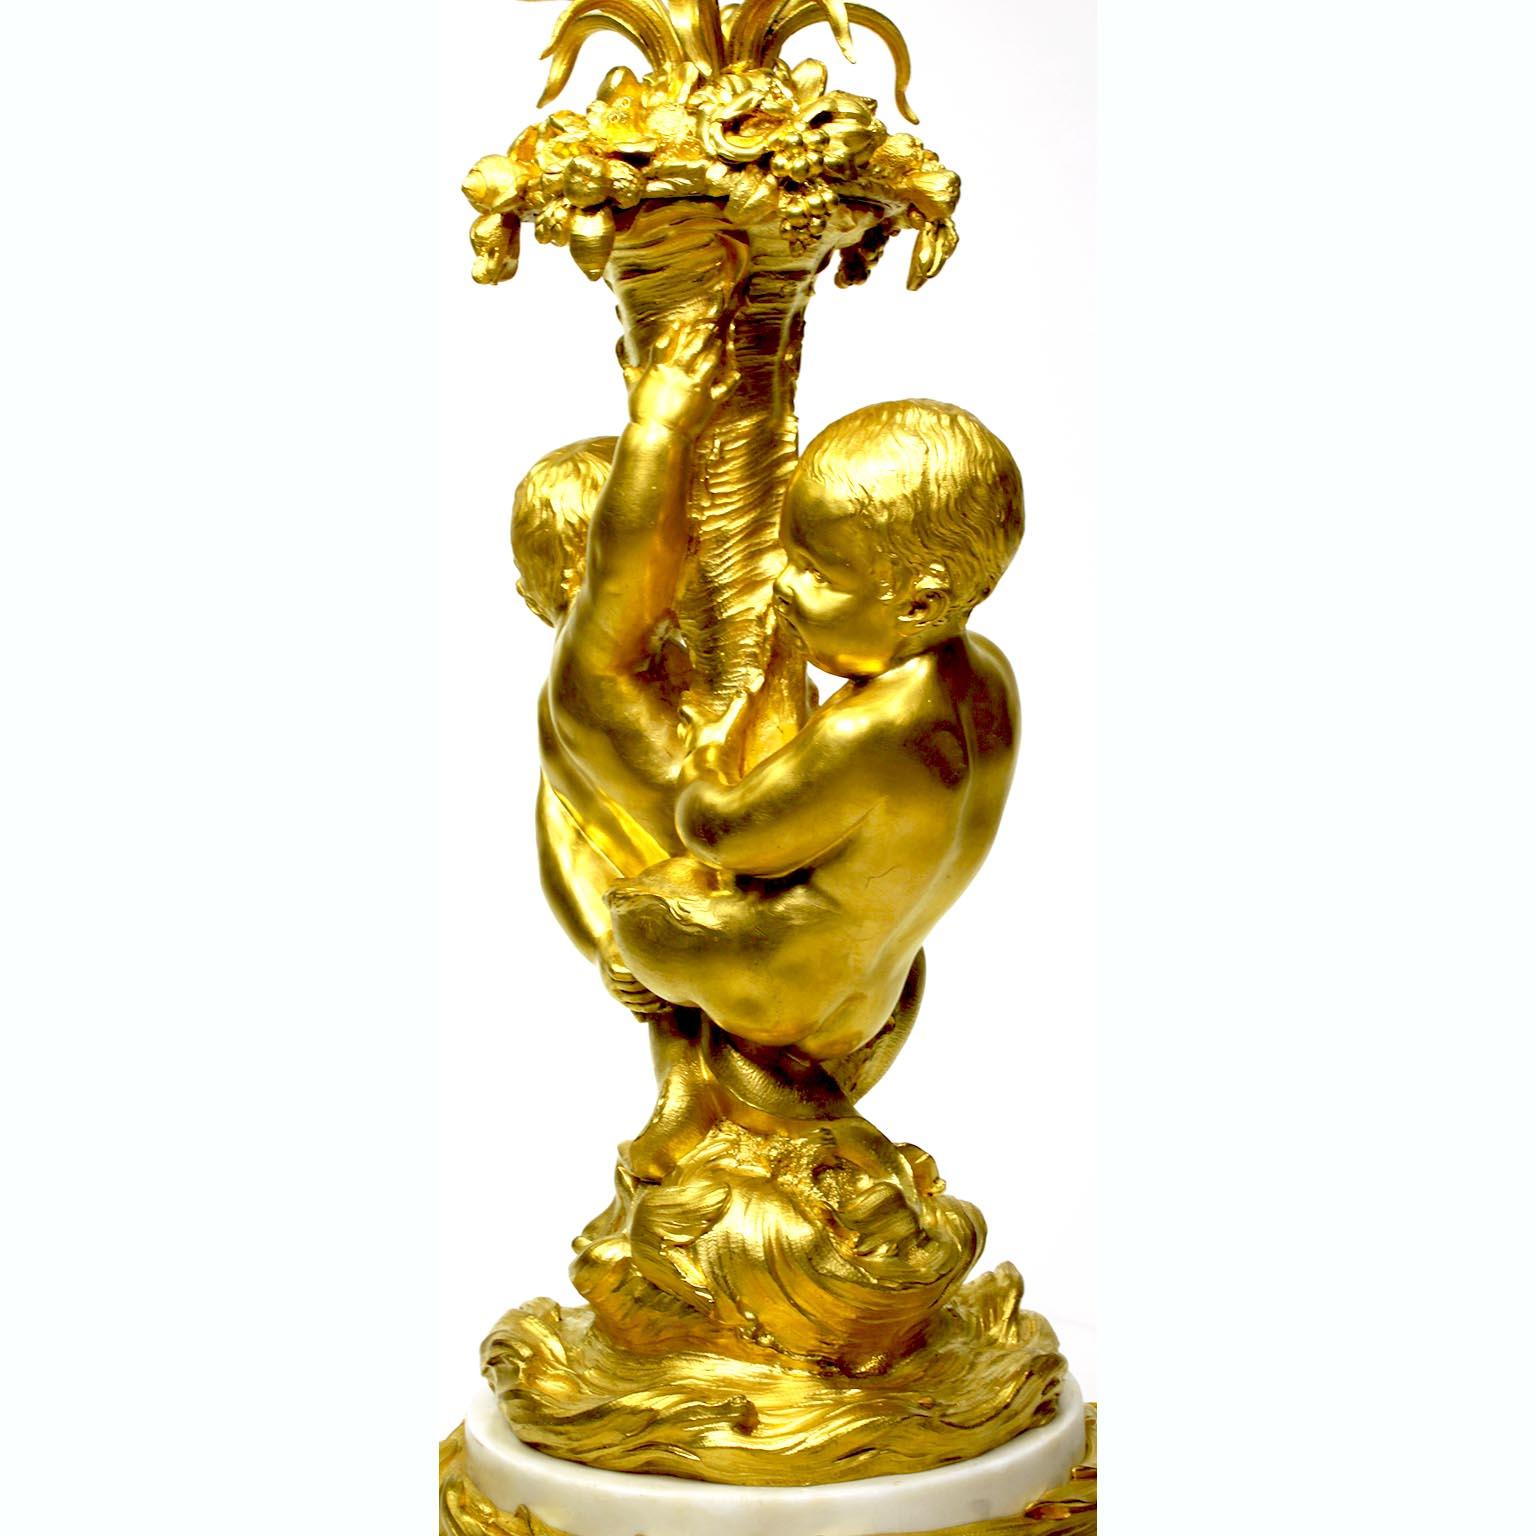 French 19th-20th Century Louis XV Style Ormolu & White Marble Mermaid Candelabra For Sale 1